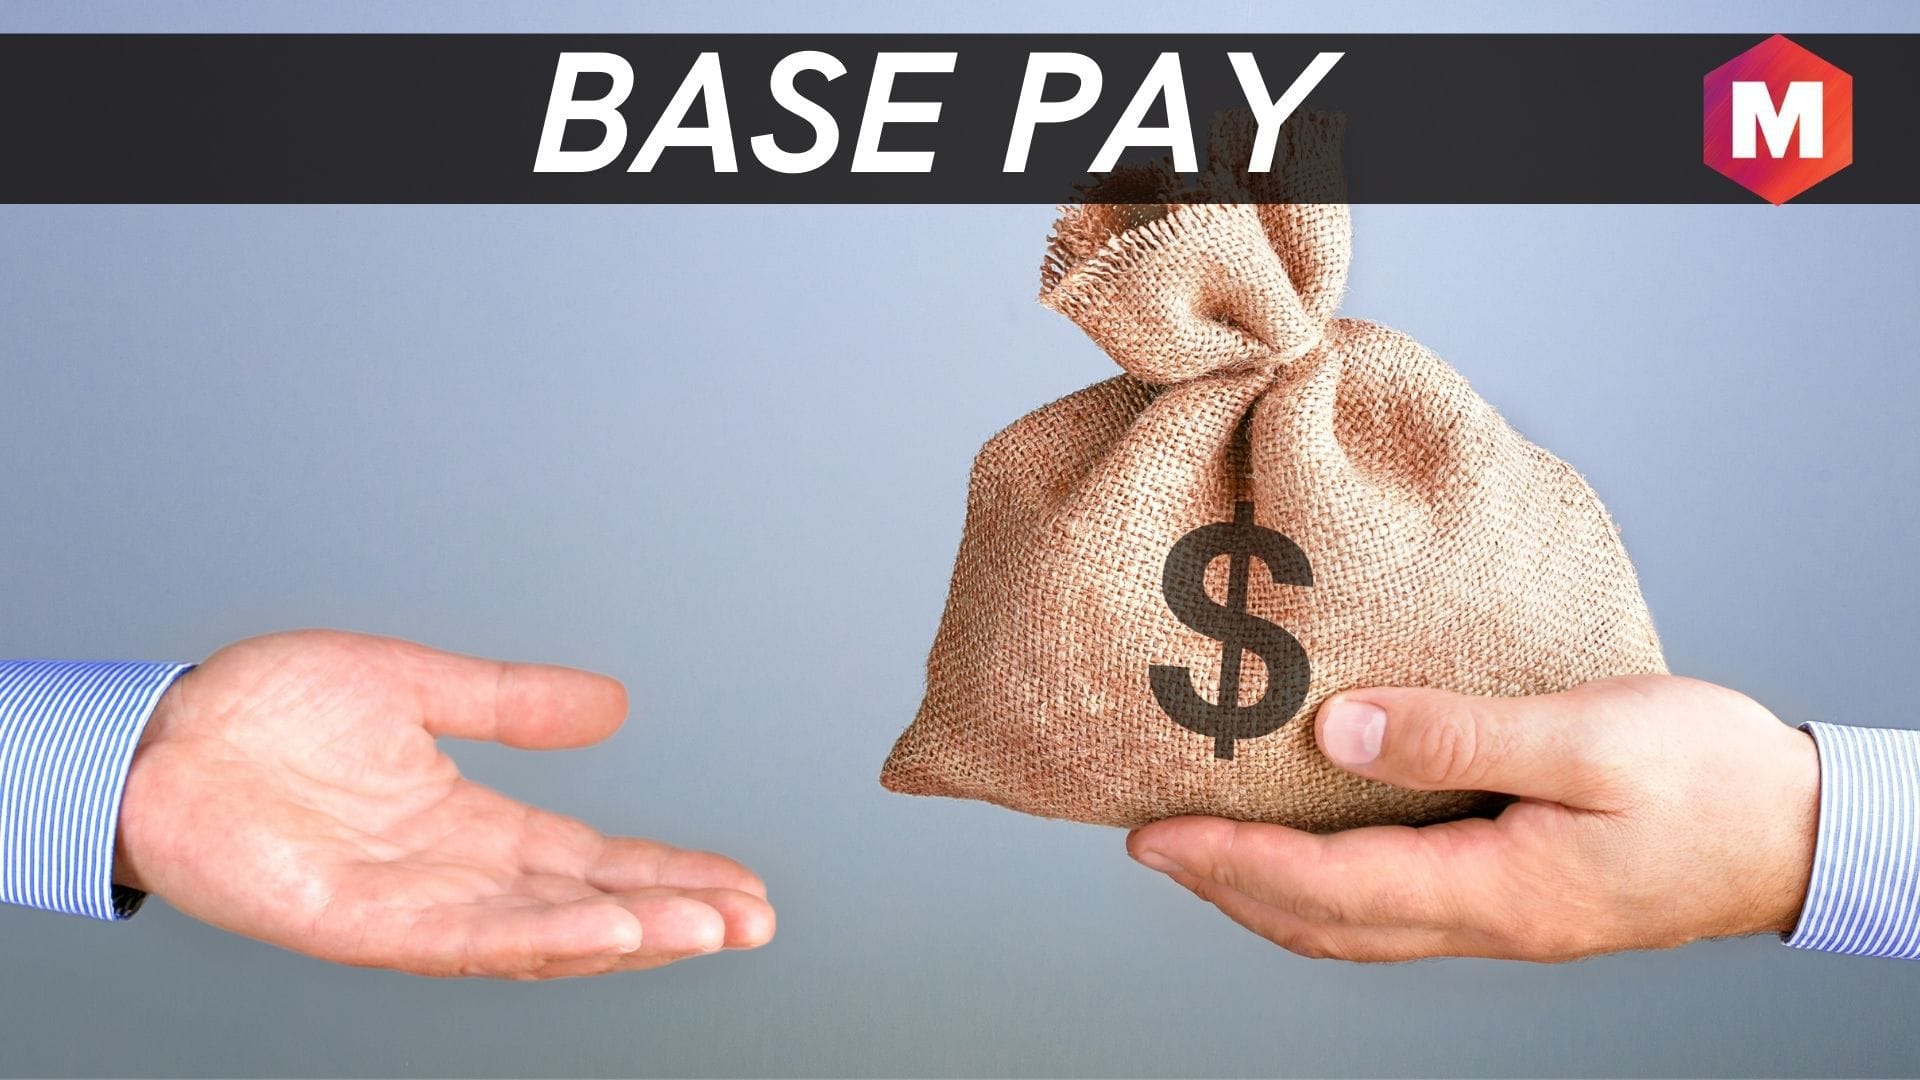 Base Pay - Definition, Working, and Factors | Marketing91